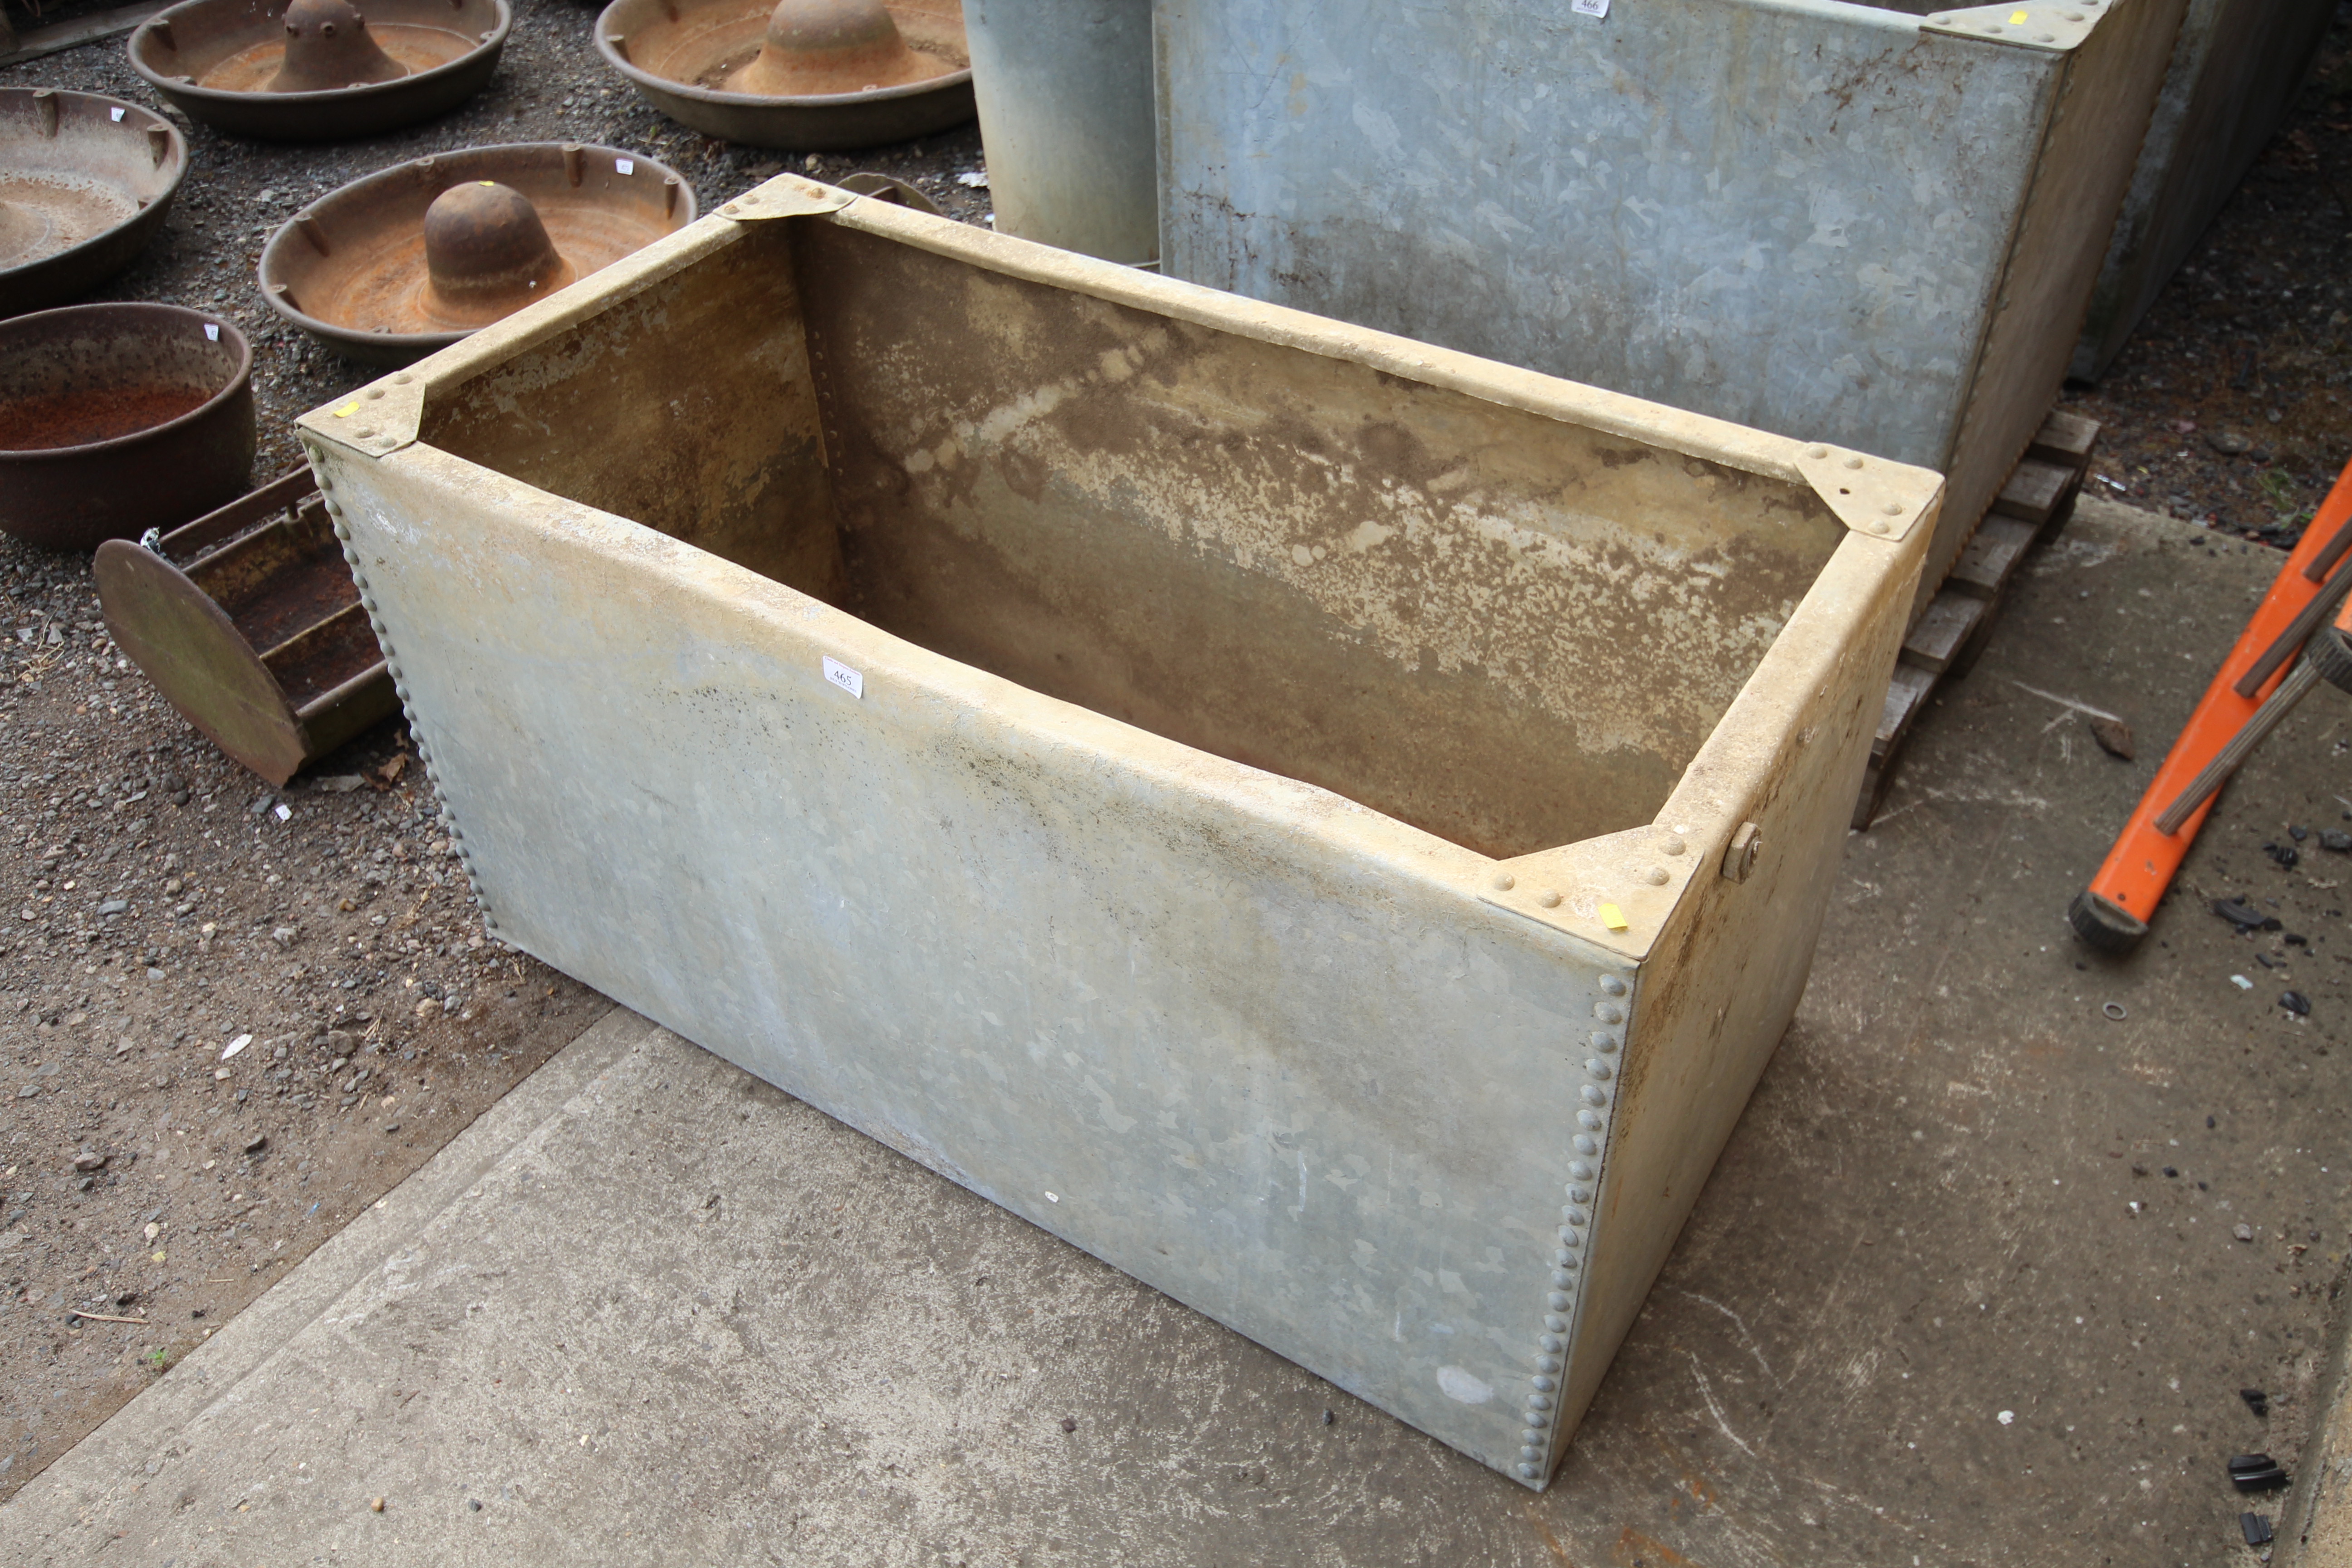 A galvanised riveted water tank, approx. 4' x 2' x 2'